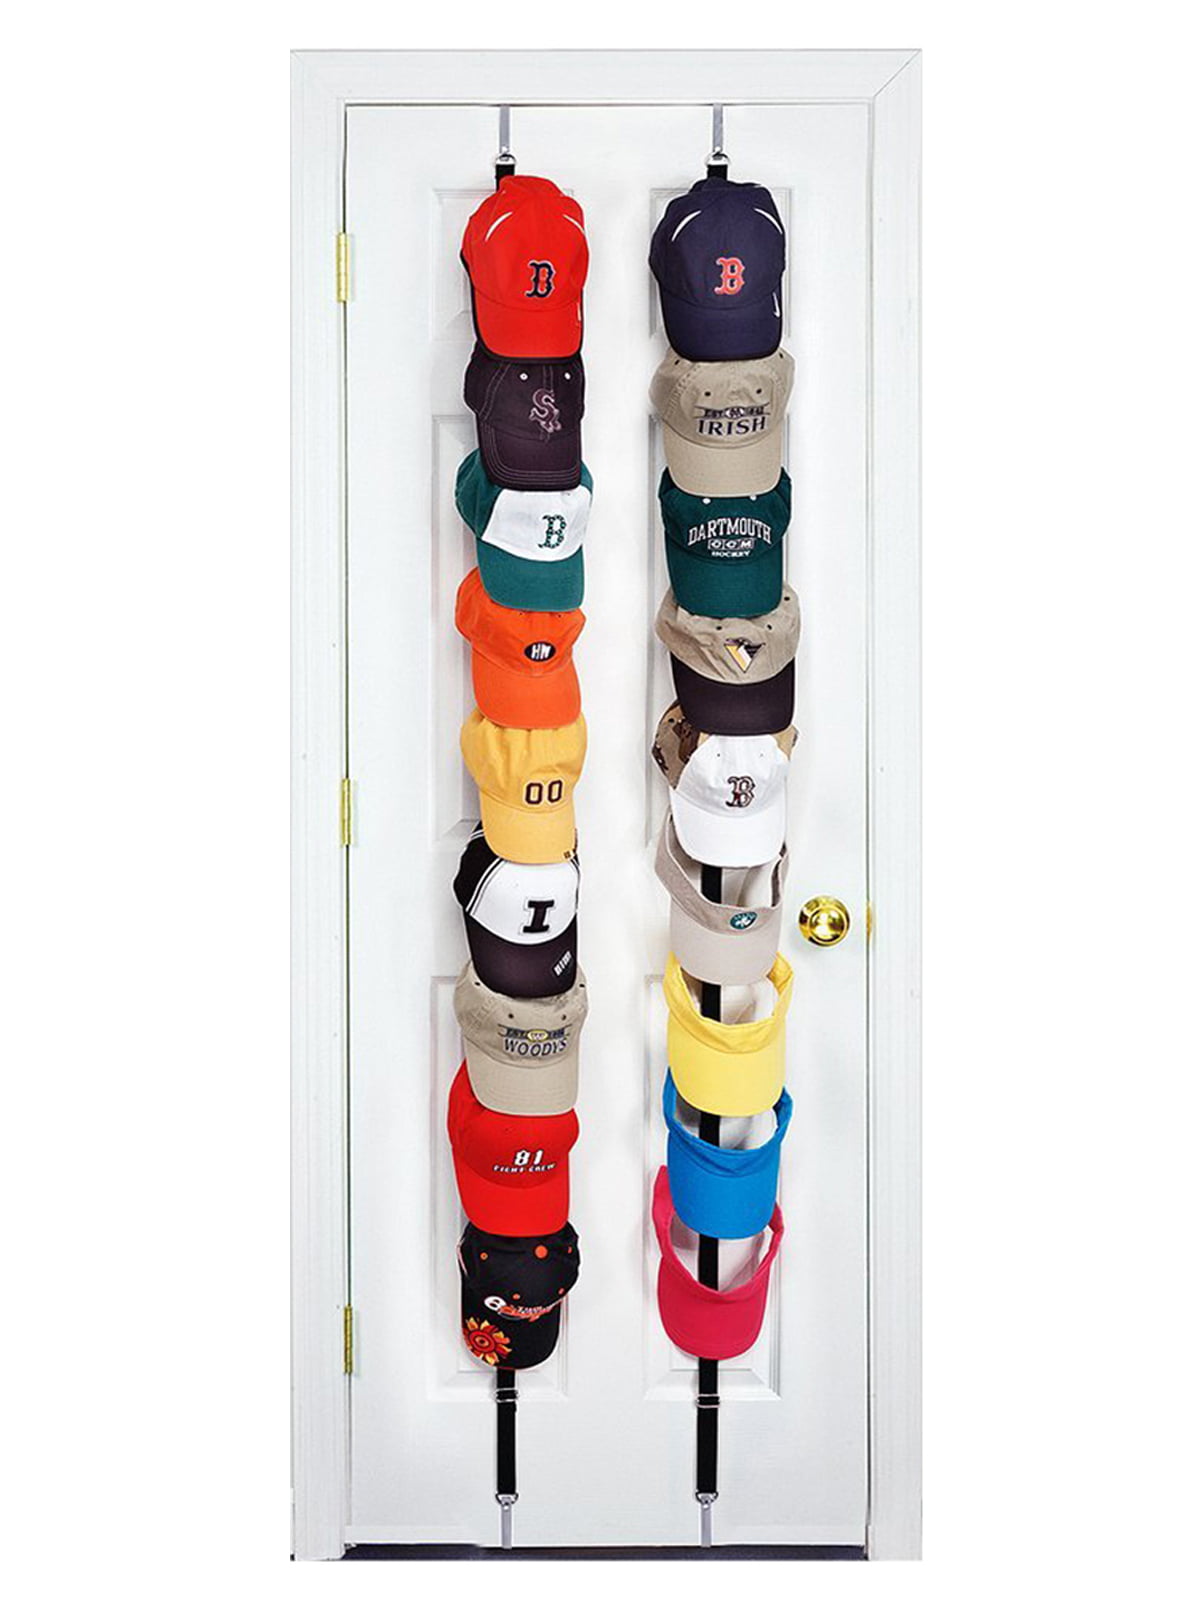 Boxy Concepts Hat Rack 10 Shelf Hat Organizer For Baseball Caps And Hats With Dust Shield Hat Racks For Baseball Caps Storage Walmart Com Walmart Com